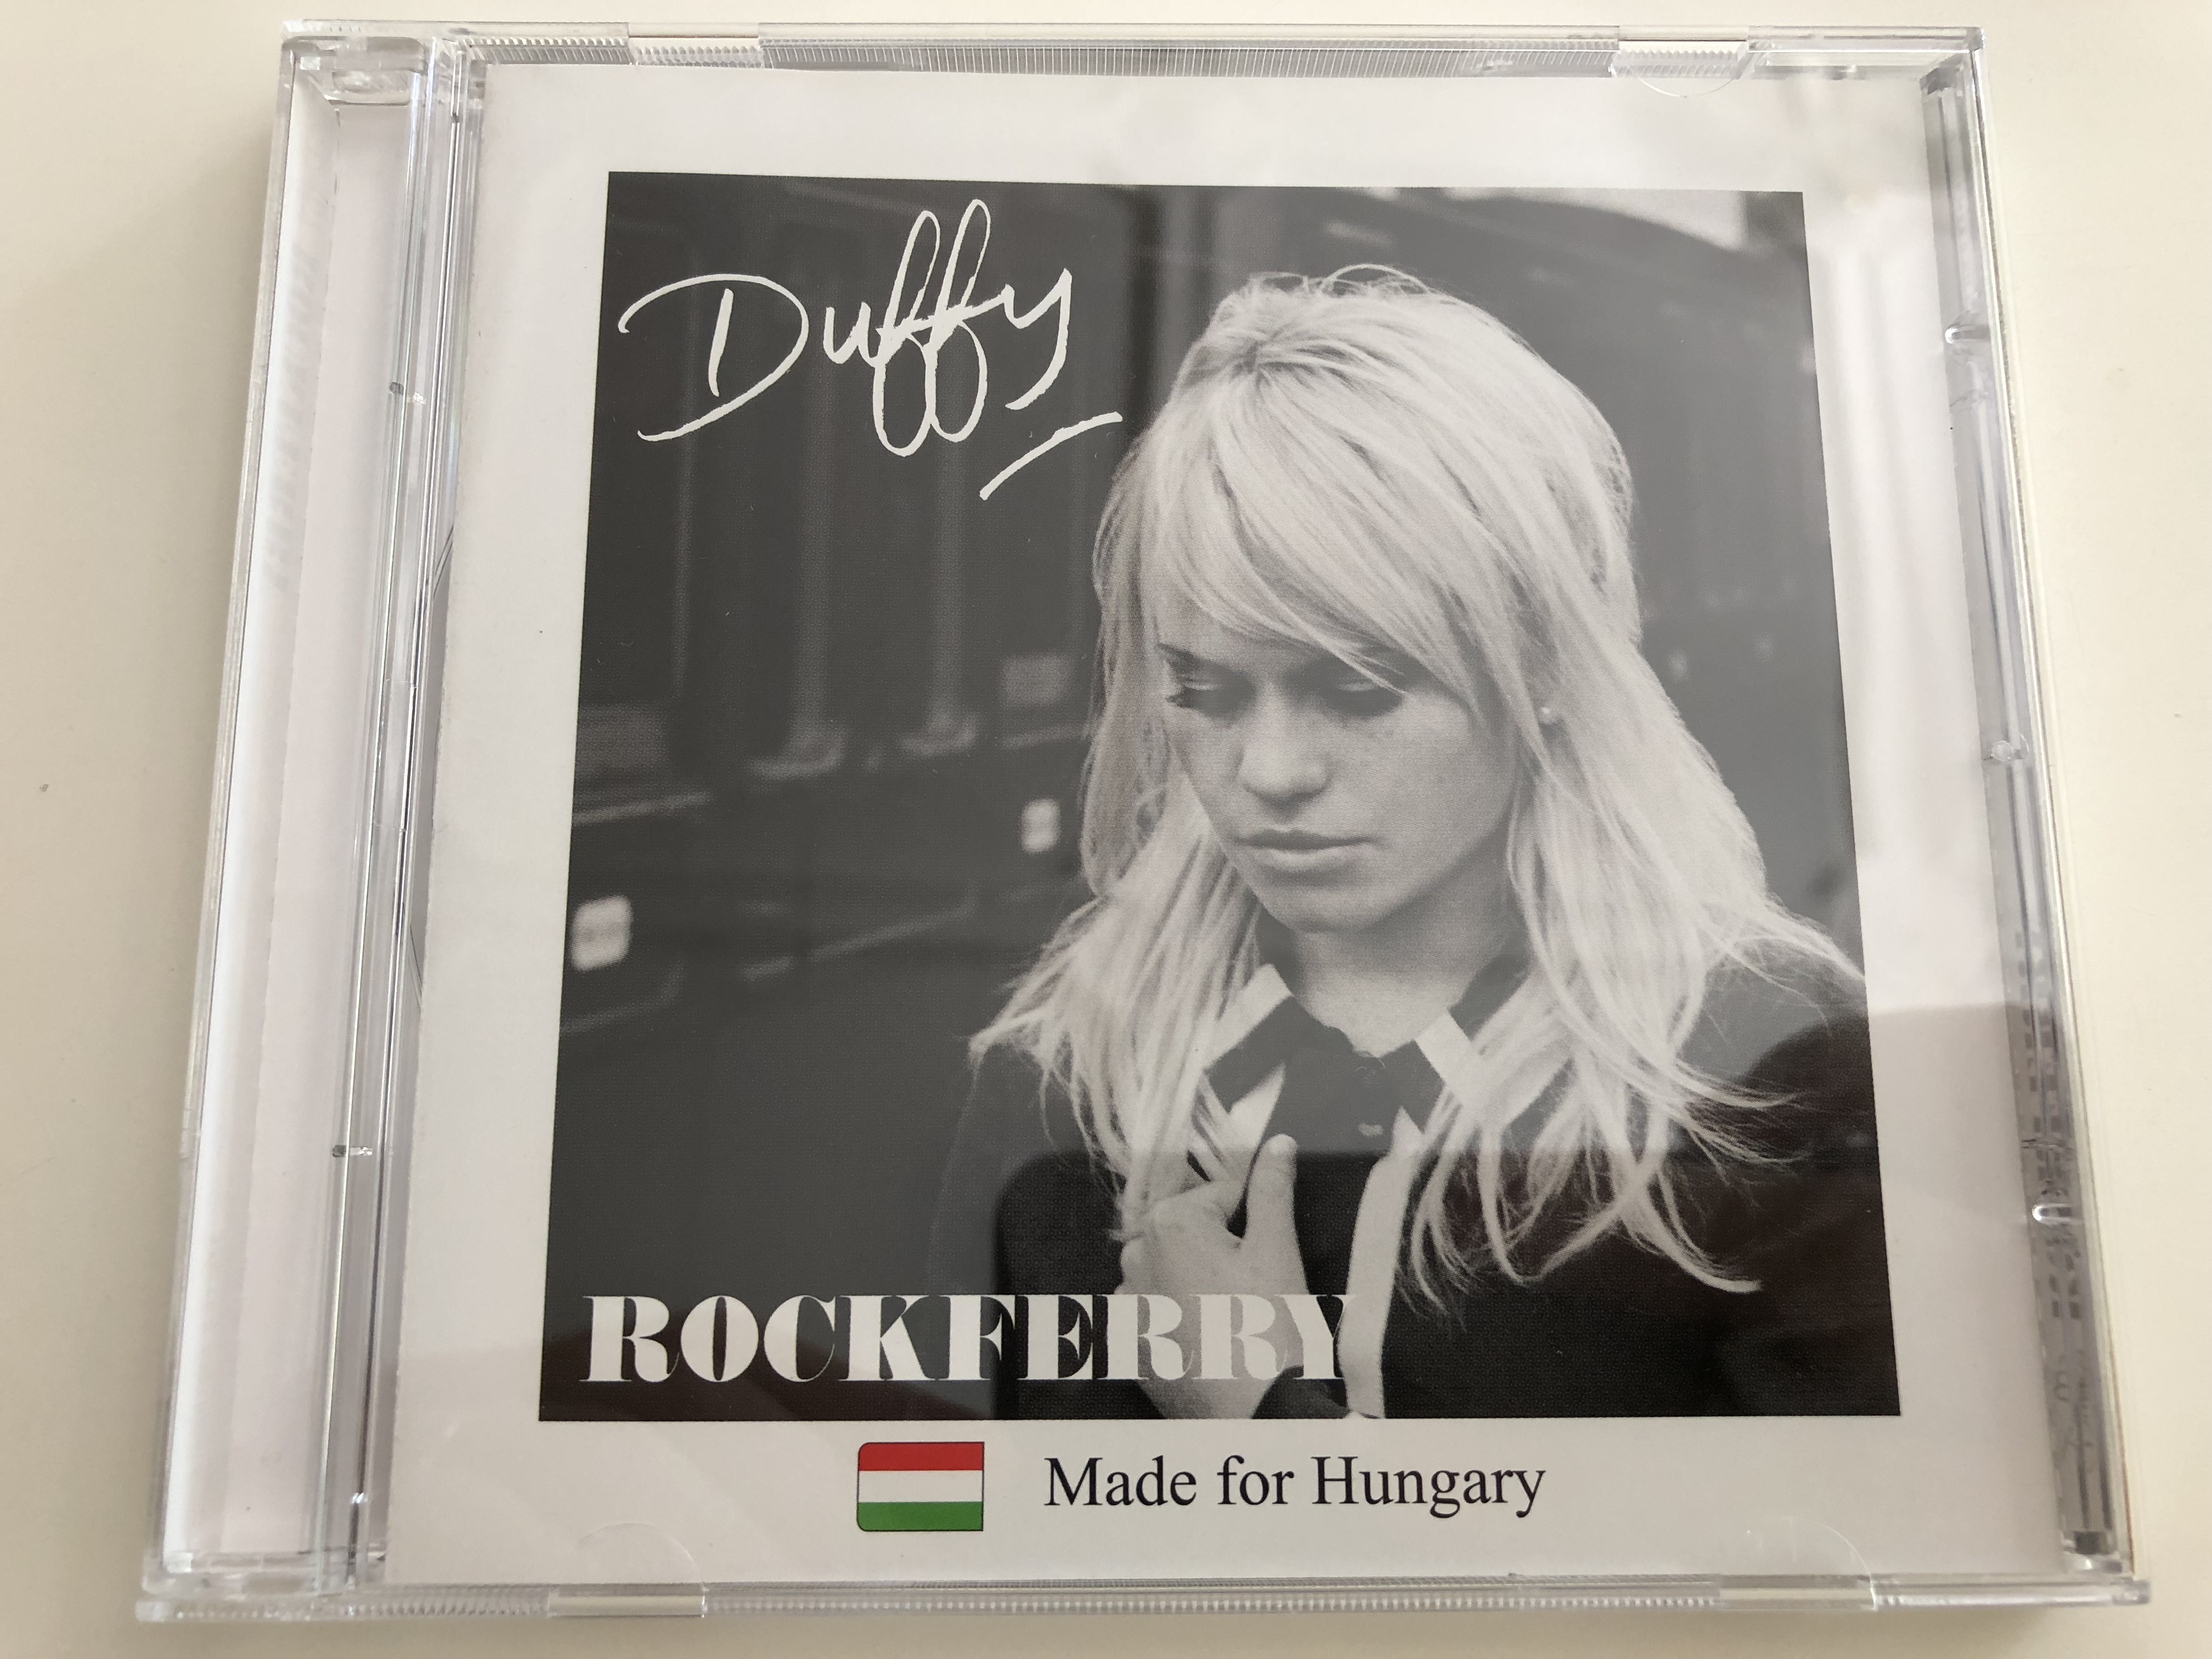 duffy-rockferry-made-for-hungary-serious-stepping-stone-mercy-distant-dreamer-audio-cd-2008-polydor-176297-5-1-.jpg